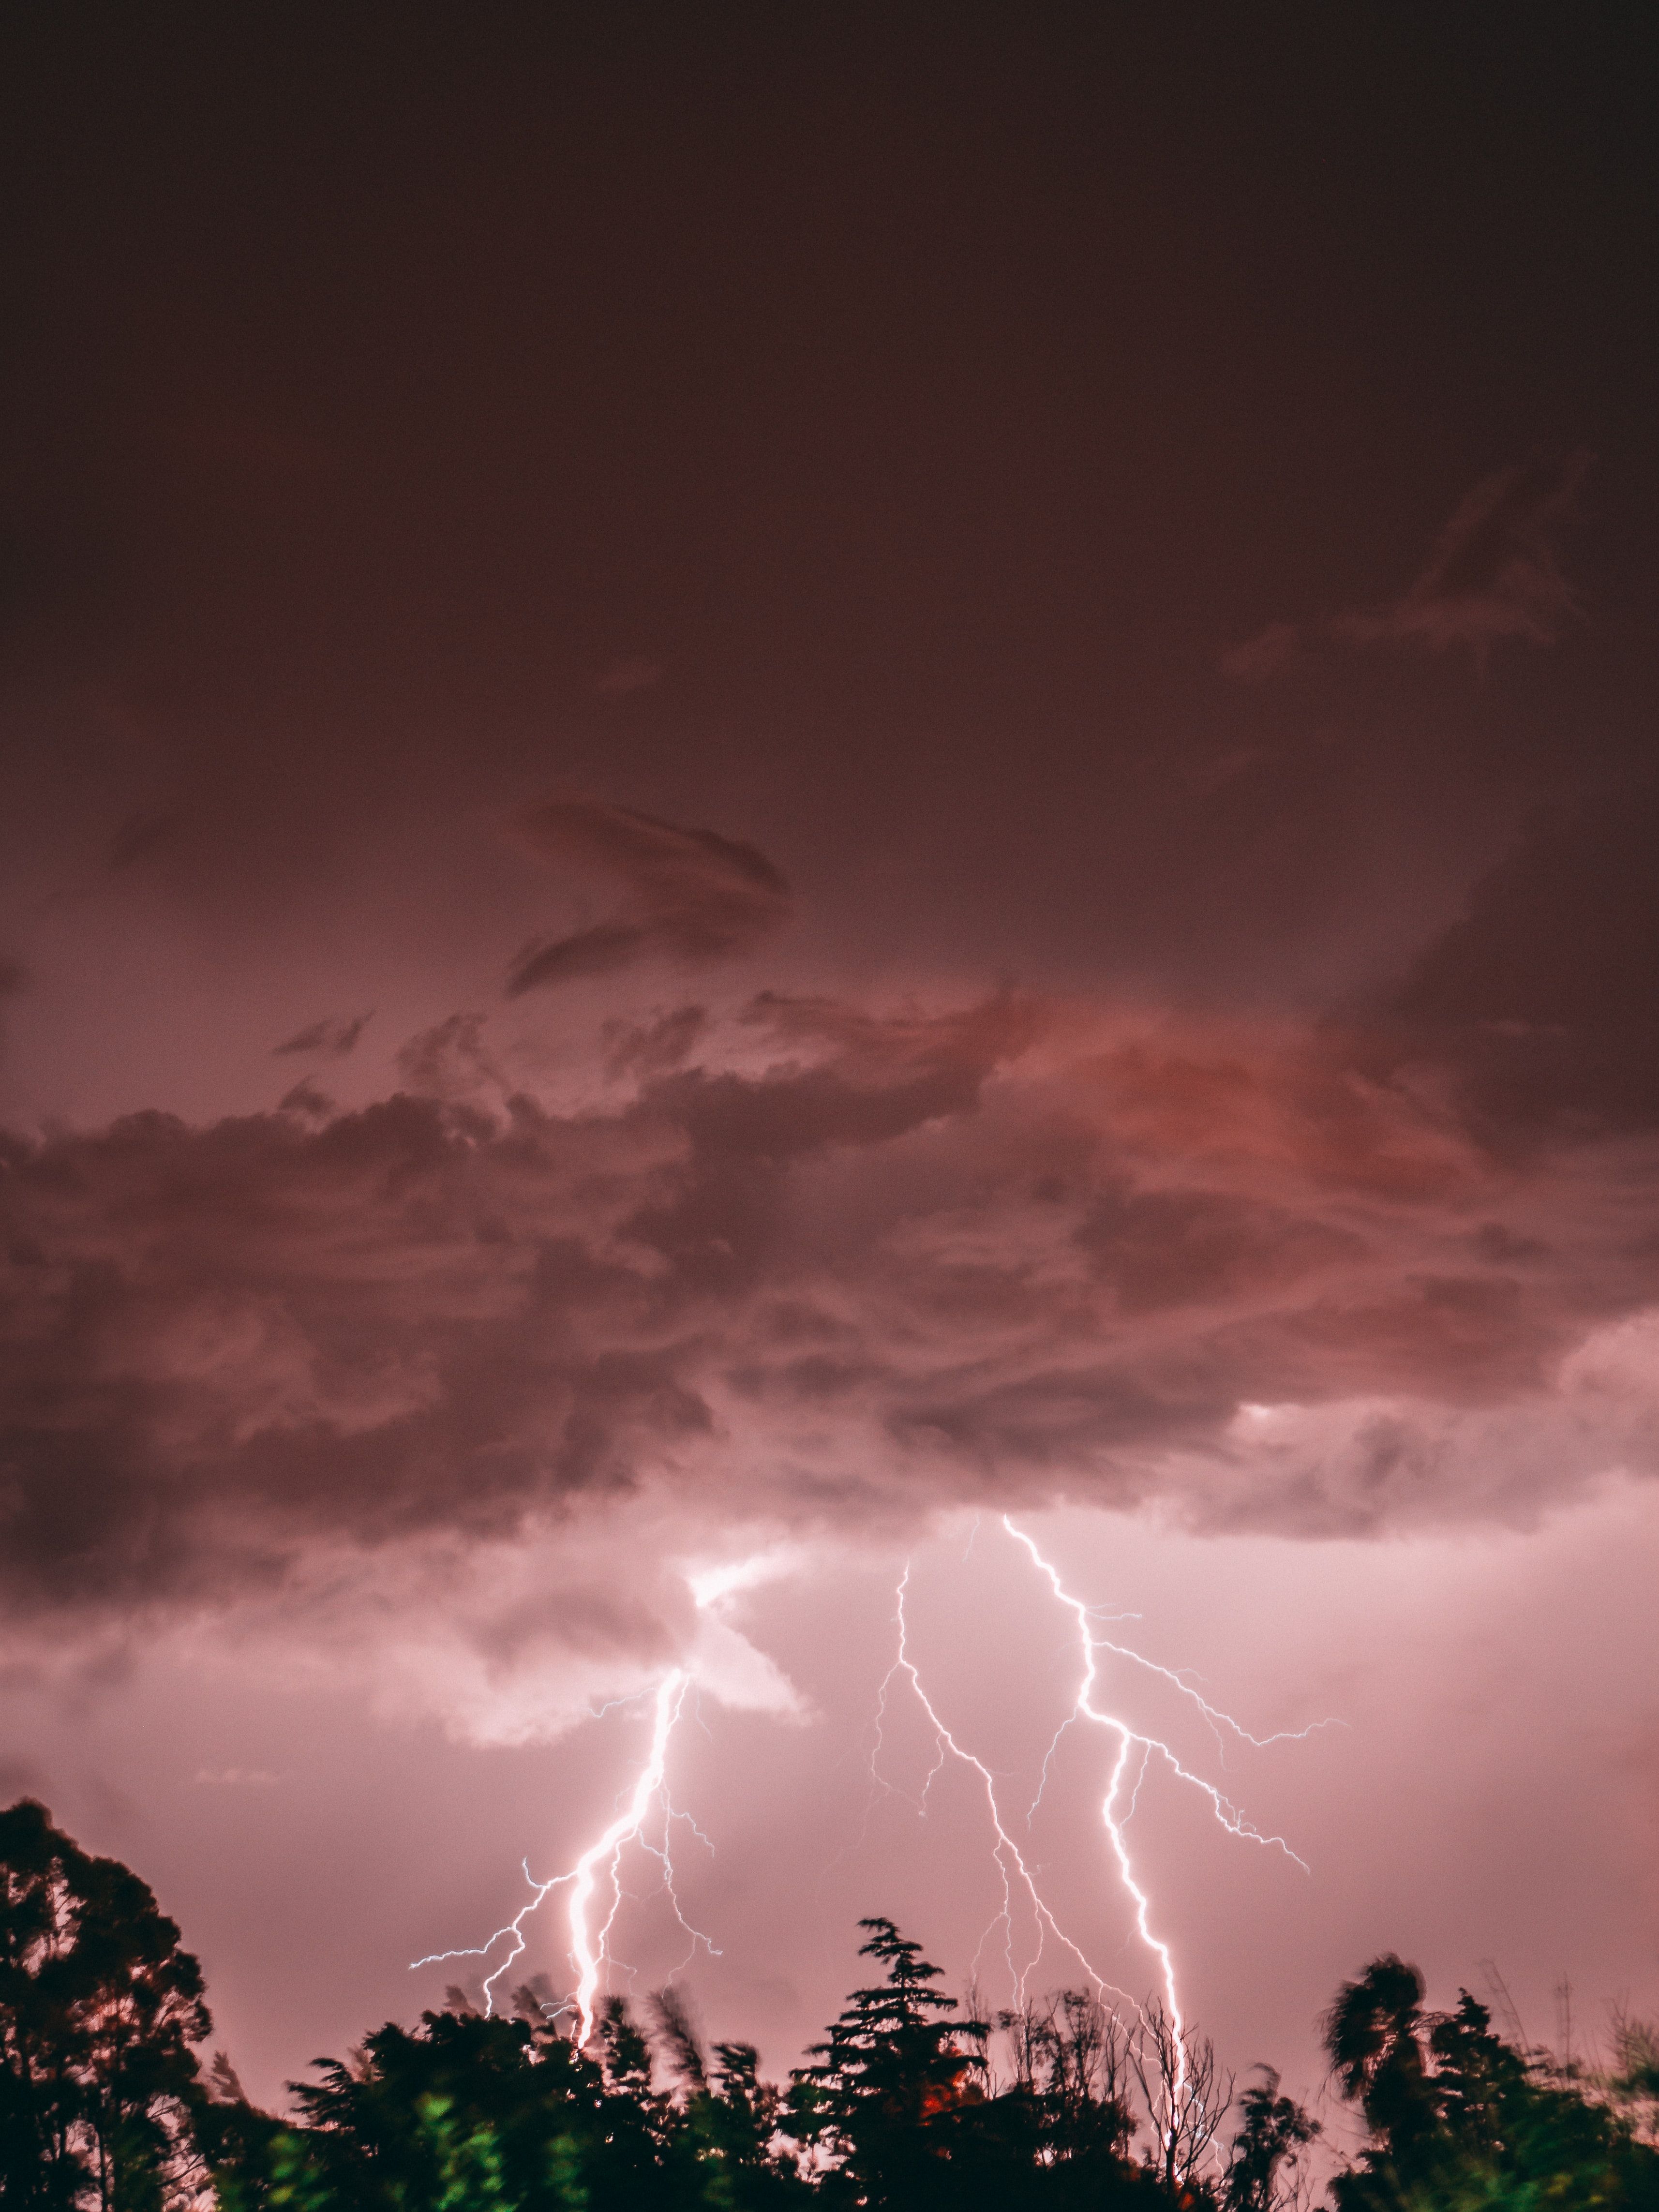 Mobile wallpaper: Lightning, Trees, Nature, Pink, Storm, Thunderstorm, 107511 download the picture for free